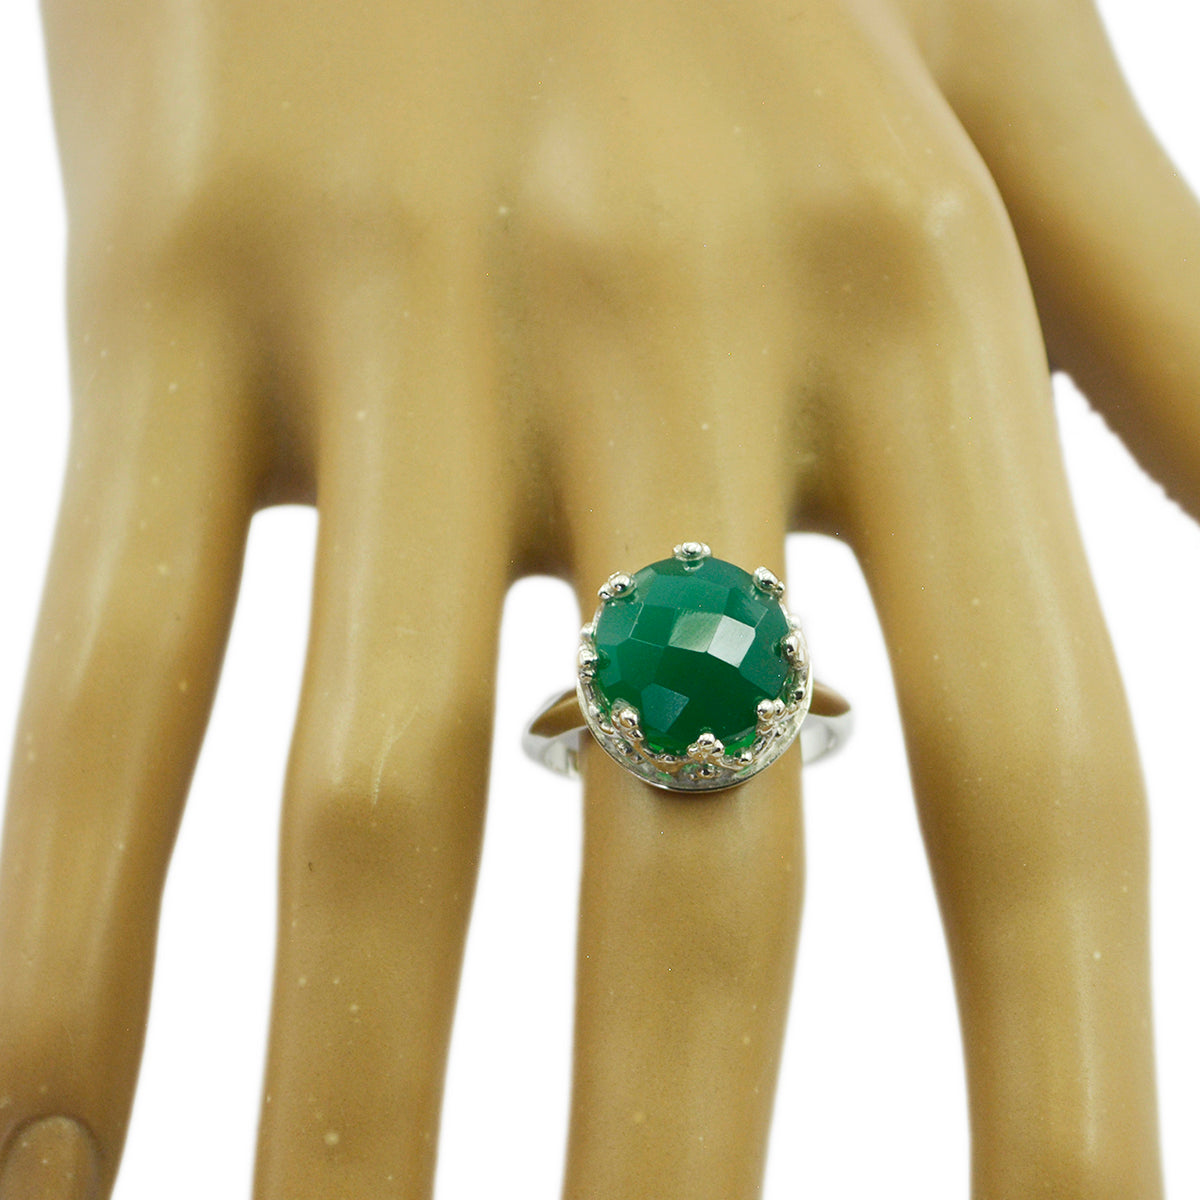 Statuesque Gem Green Onyx 925 Sterling Silver Rings Jewelry Clasp